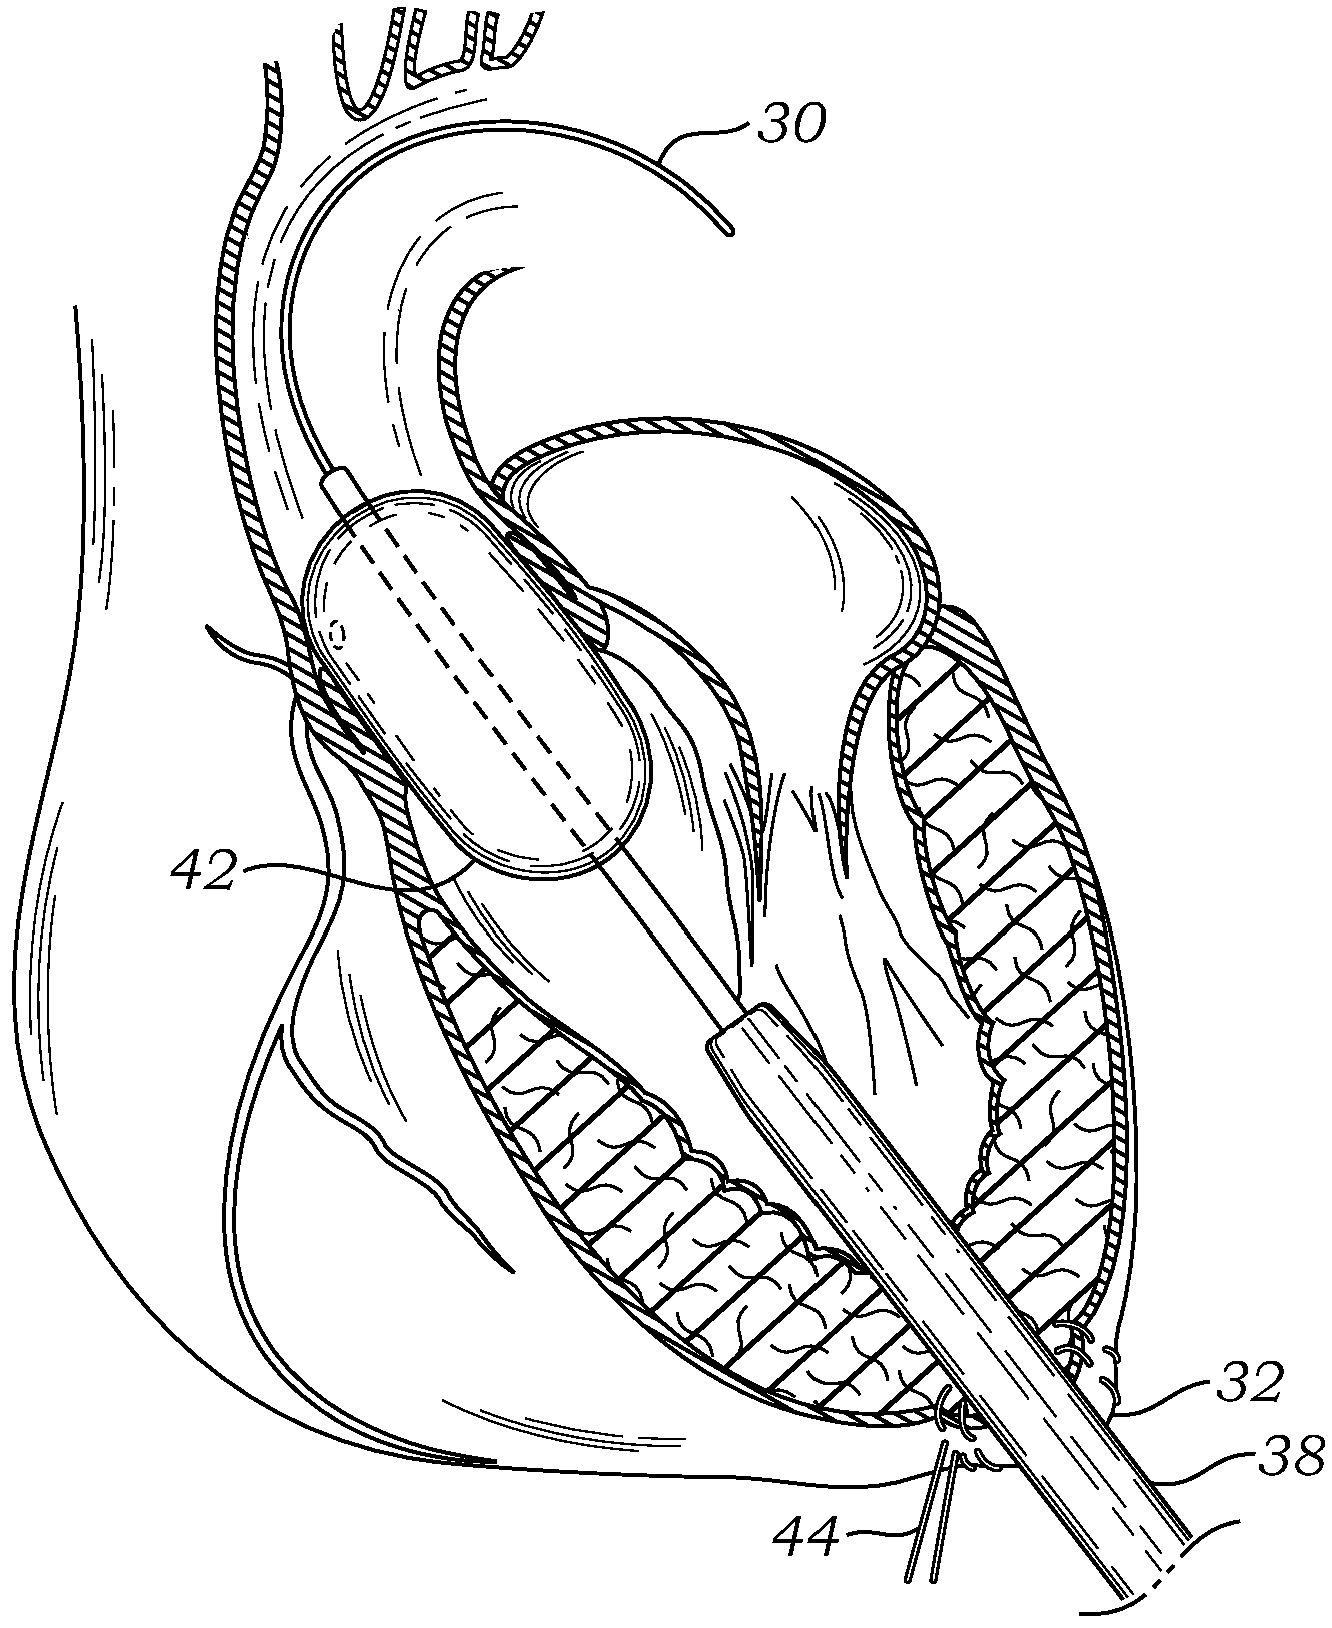 Transapical deliverry system for heart valves